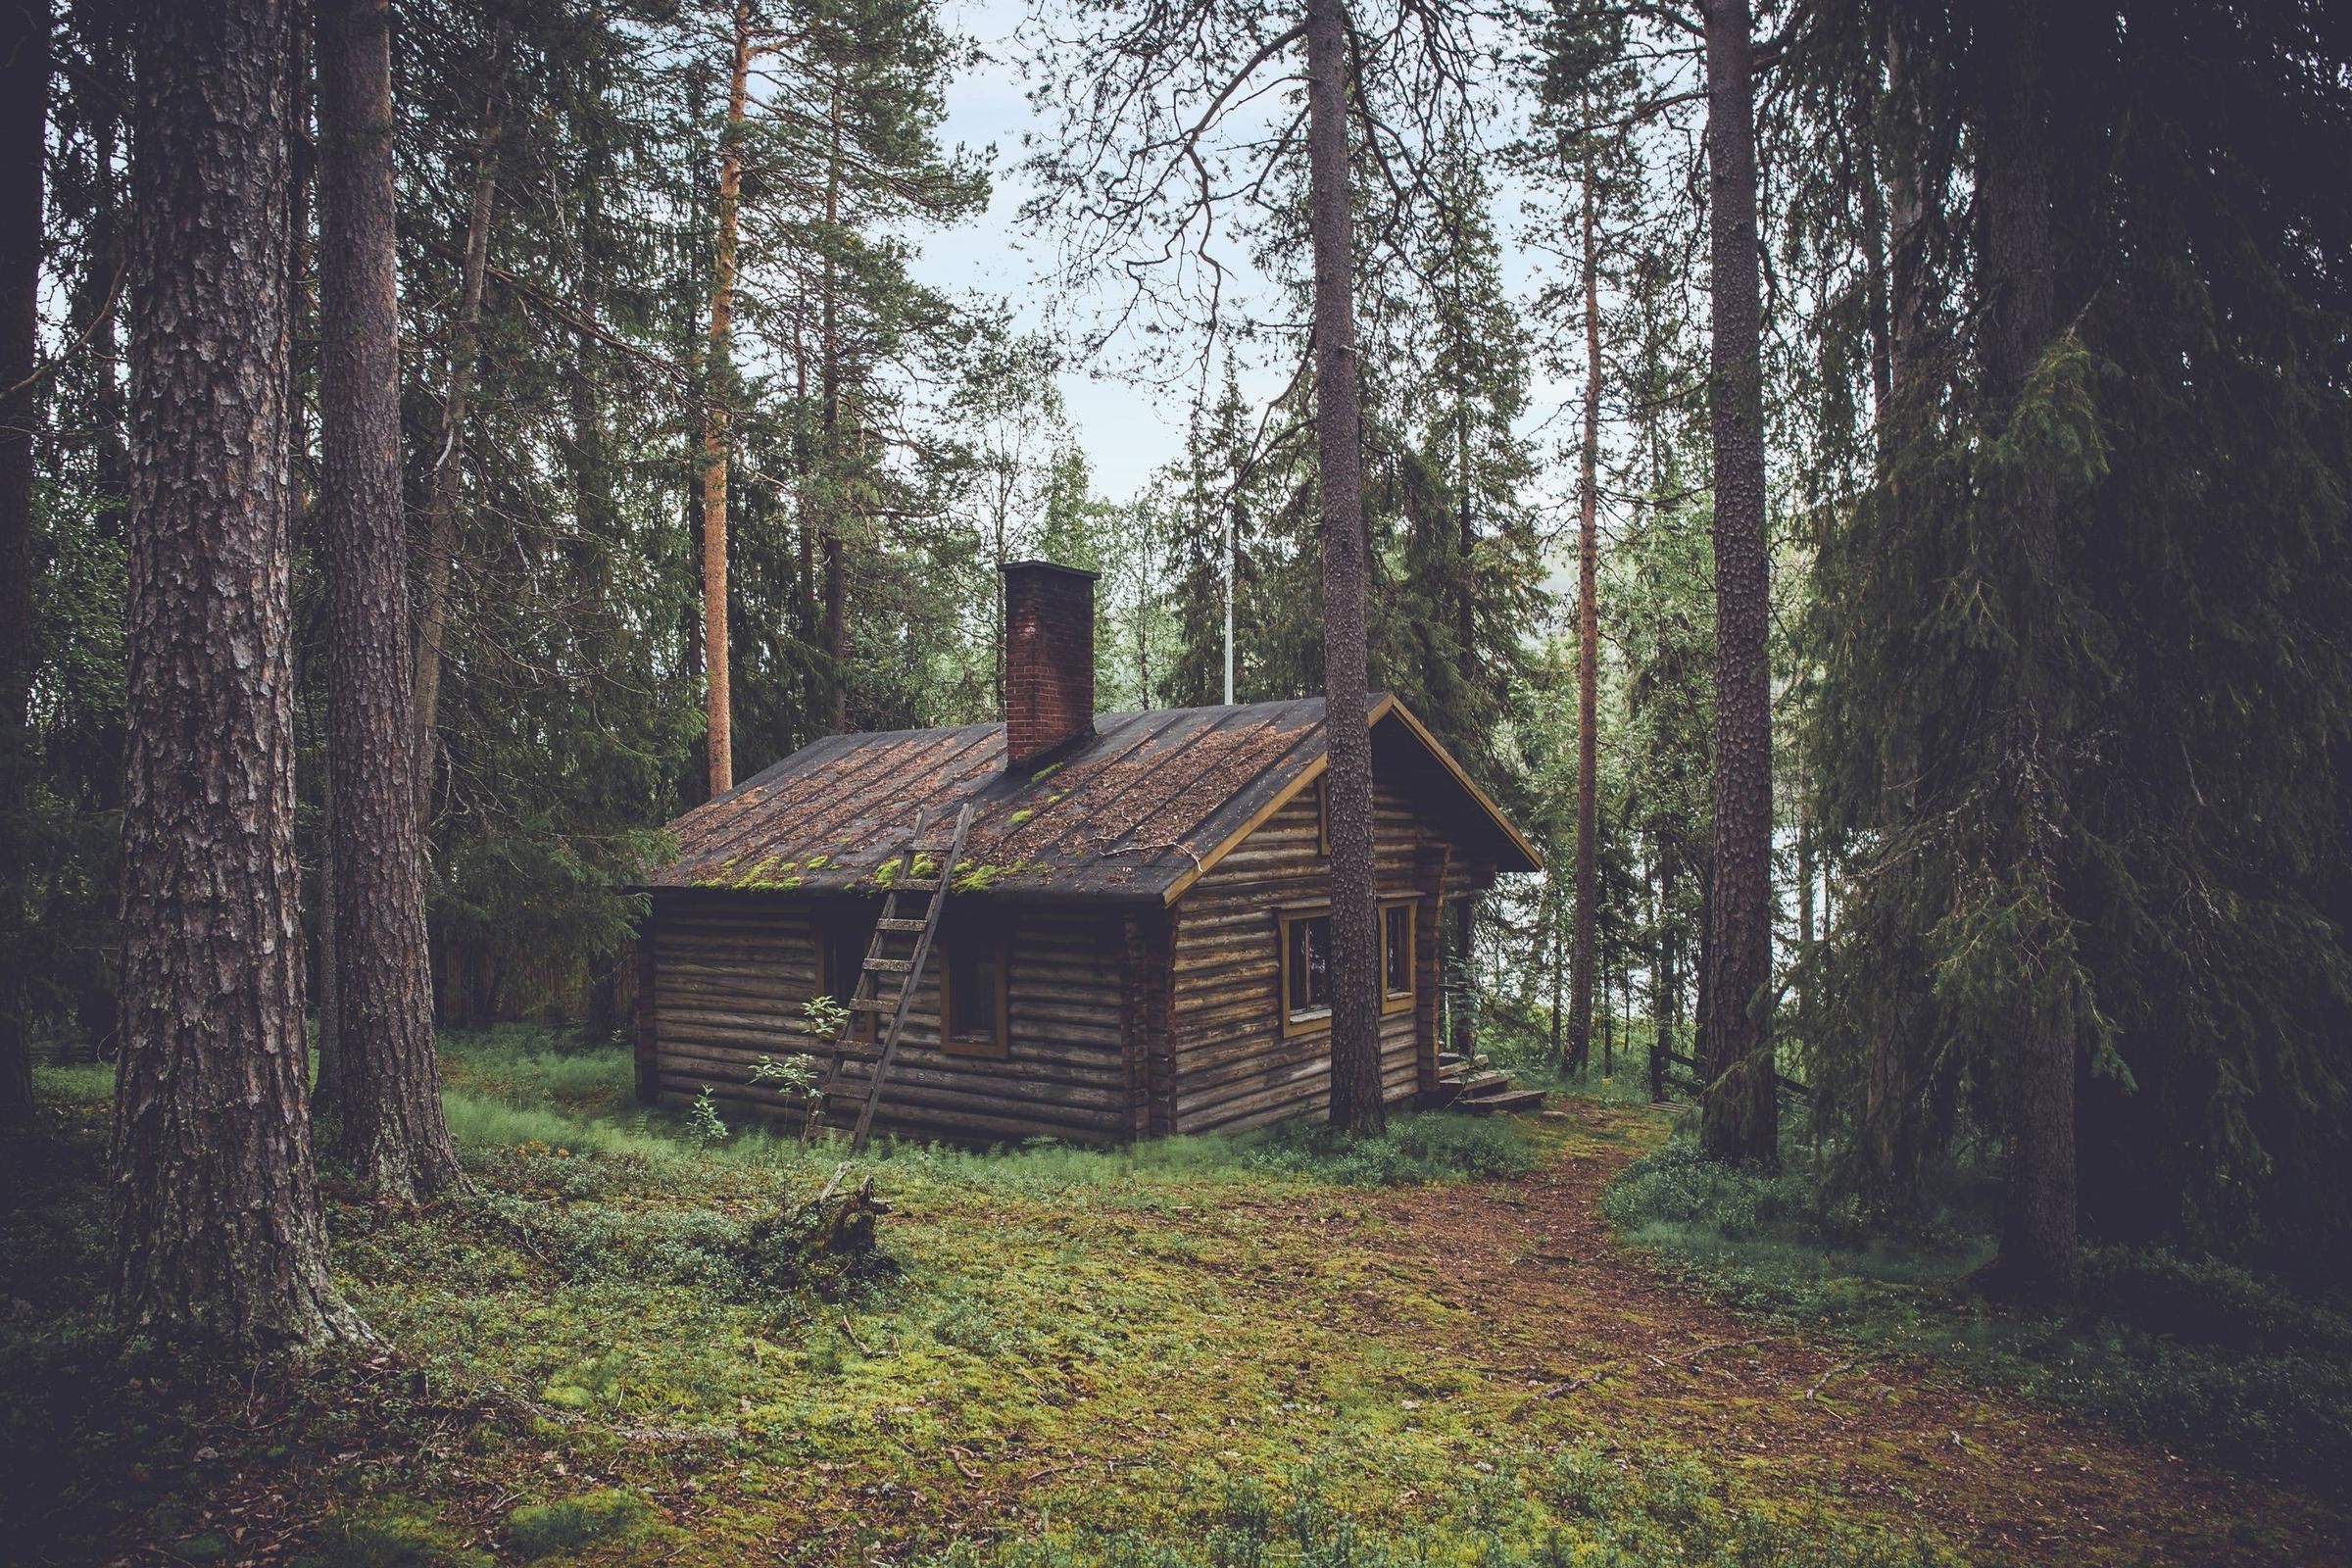 cottage, Forest, Chimneys, Pine trees, Cozy, Rooftops, Trees, Wood, House, Cabin Wallpaper